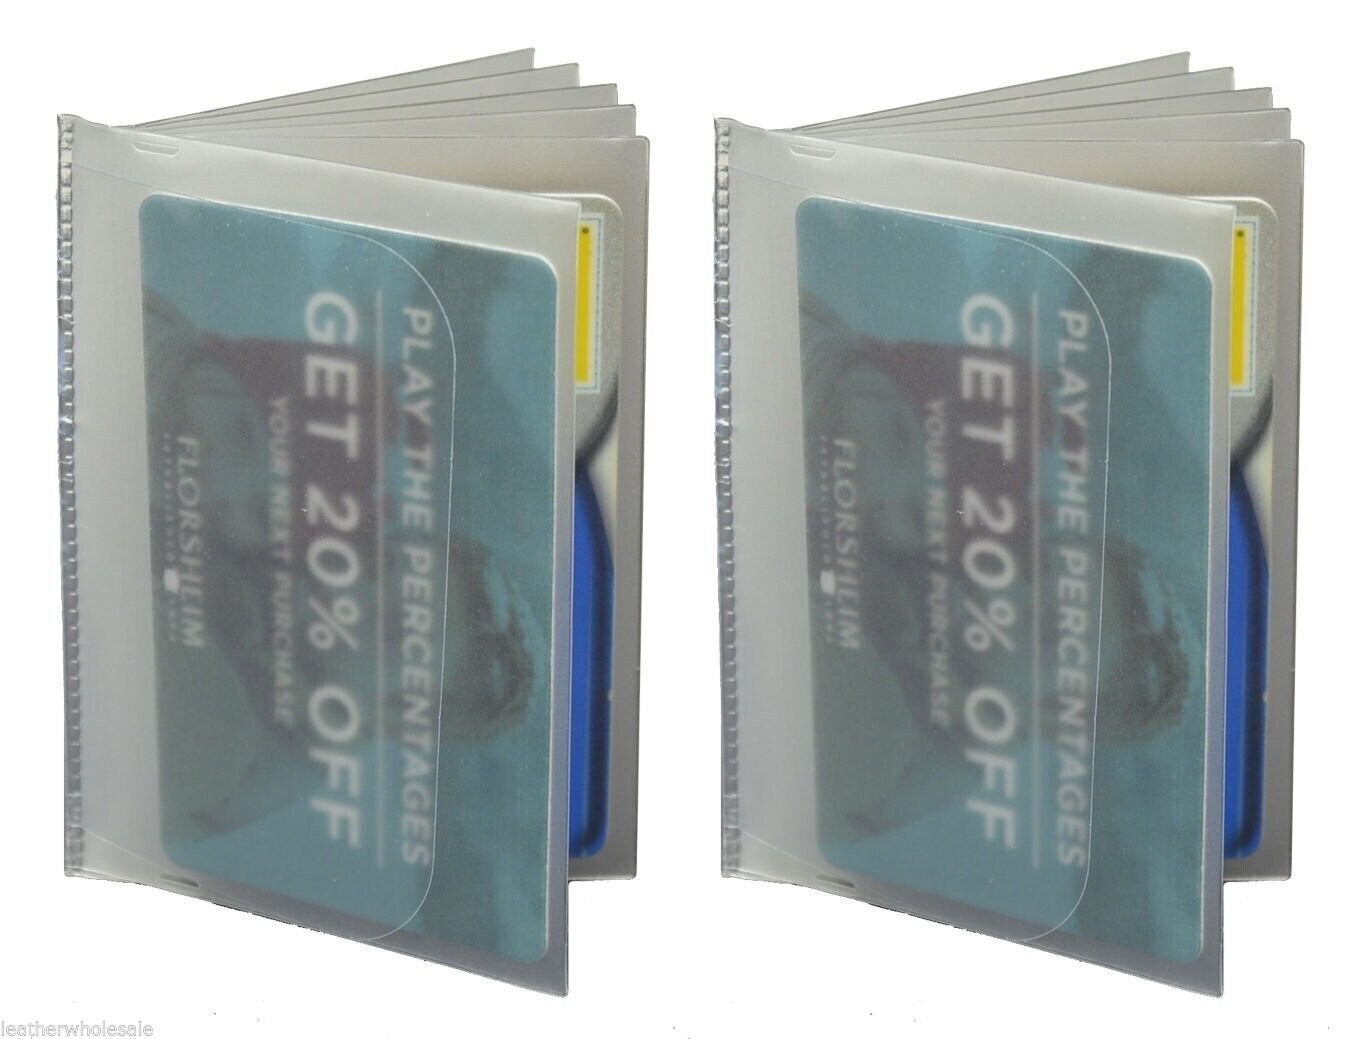 Insert Wallet Set of 2 Plastic Billfolds, Bifold and Trifold Card Holder 6 Pages